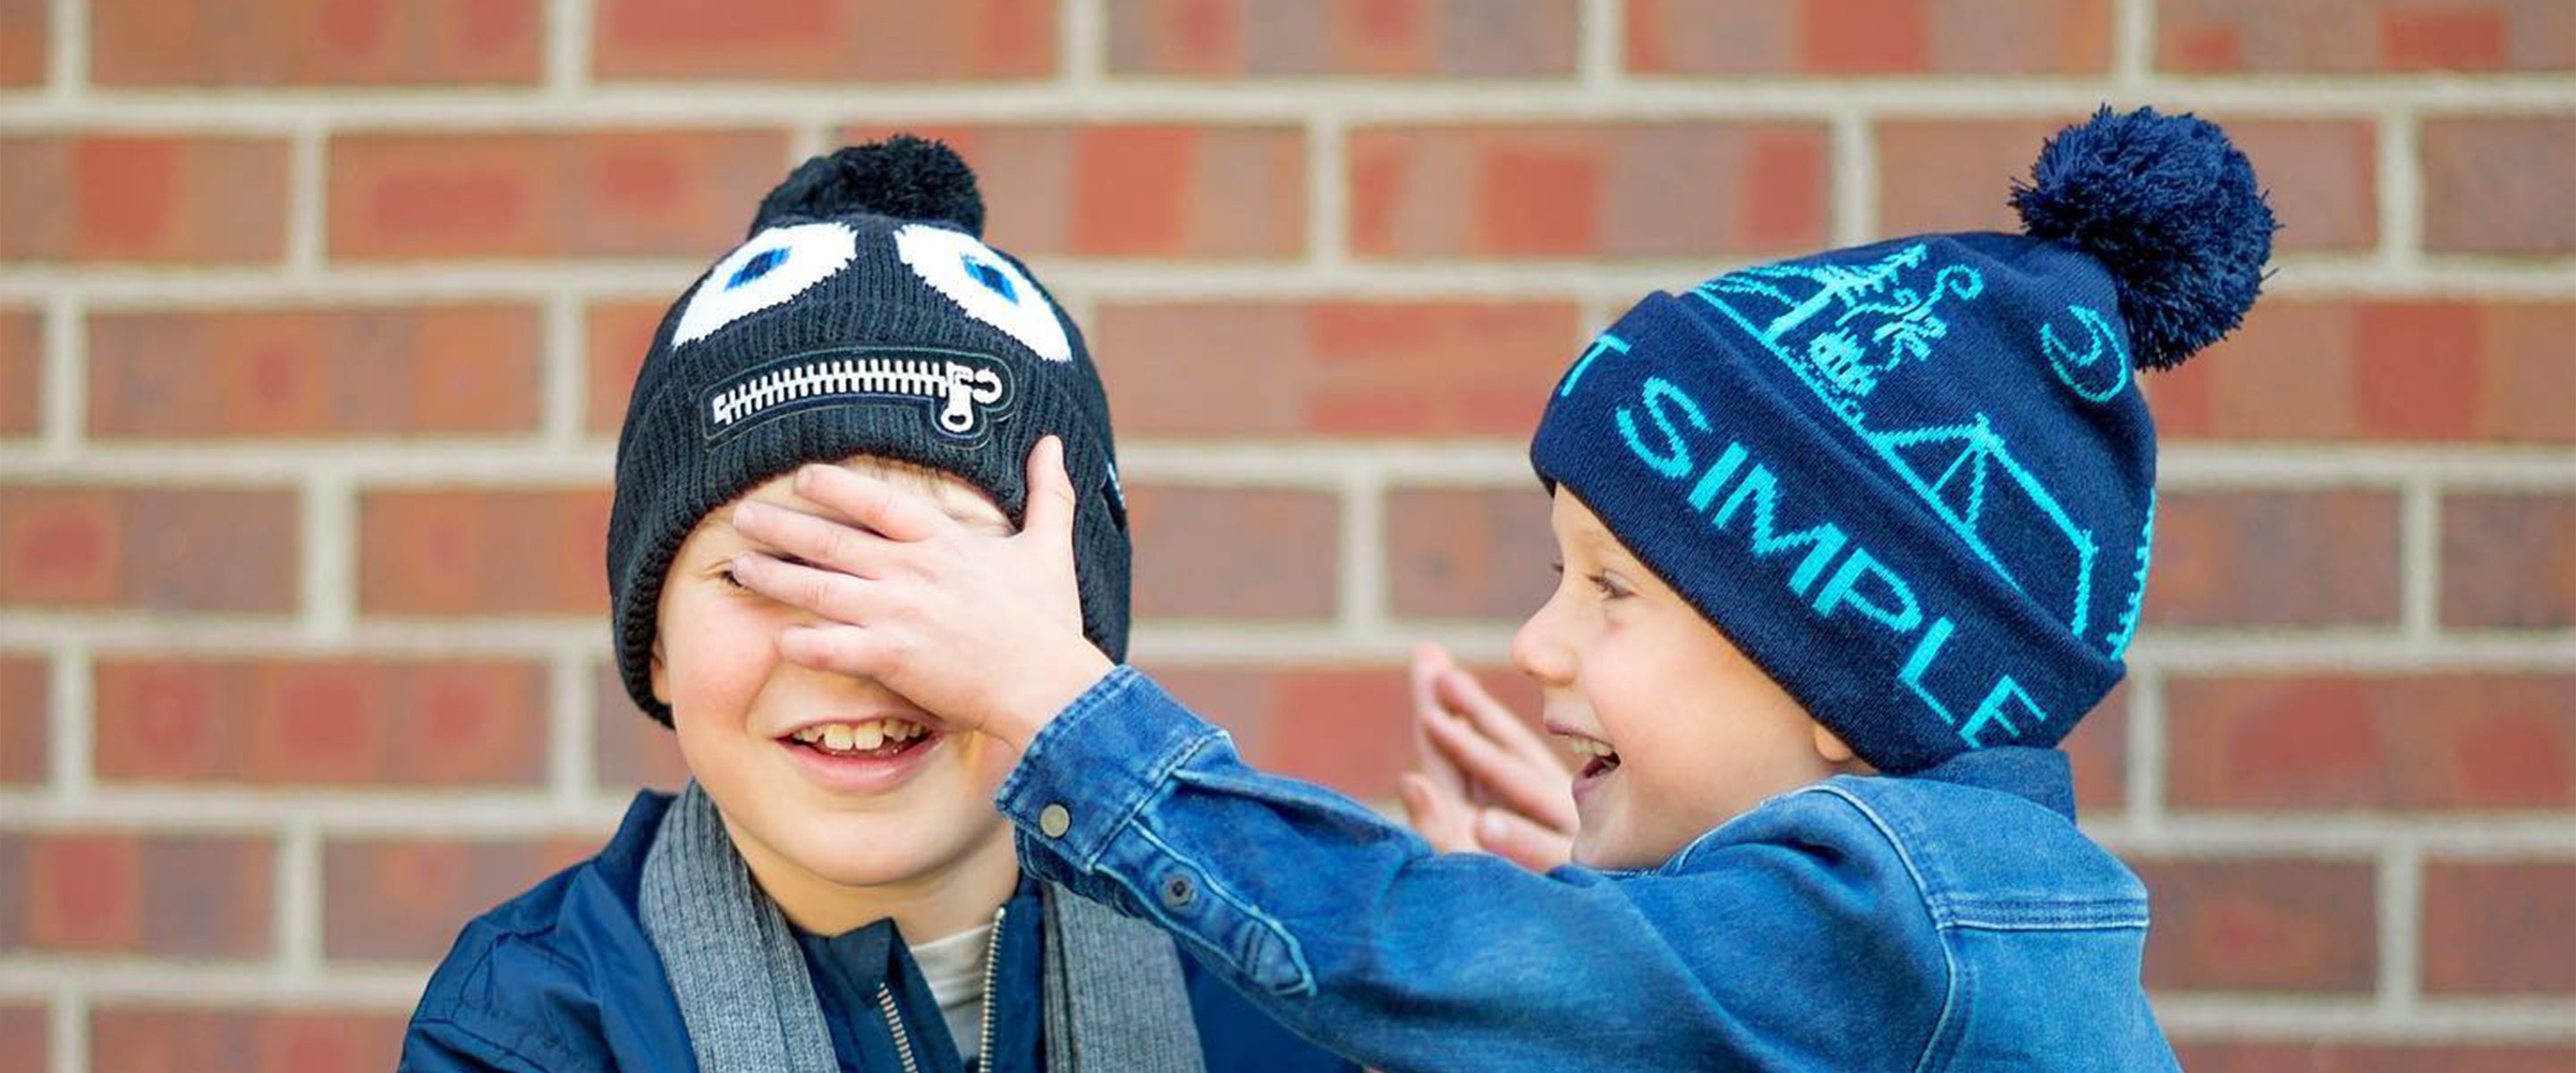 Oberson Bula Neckwarmers – Beanies Kids and for -